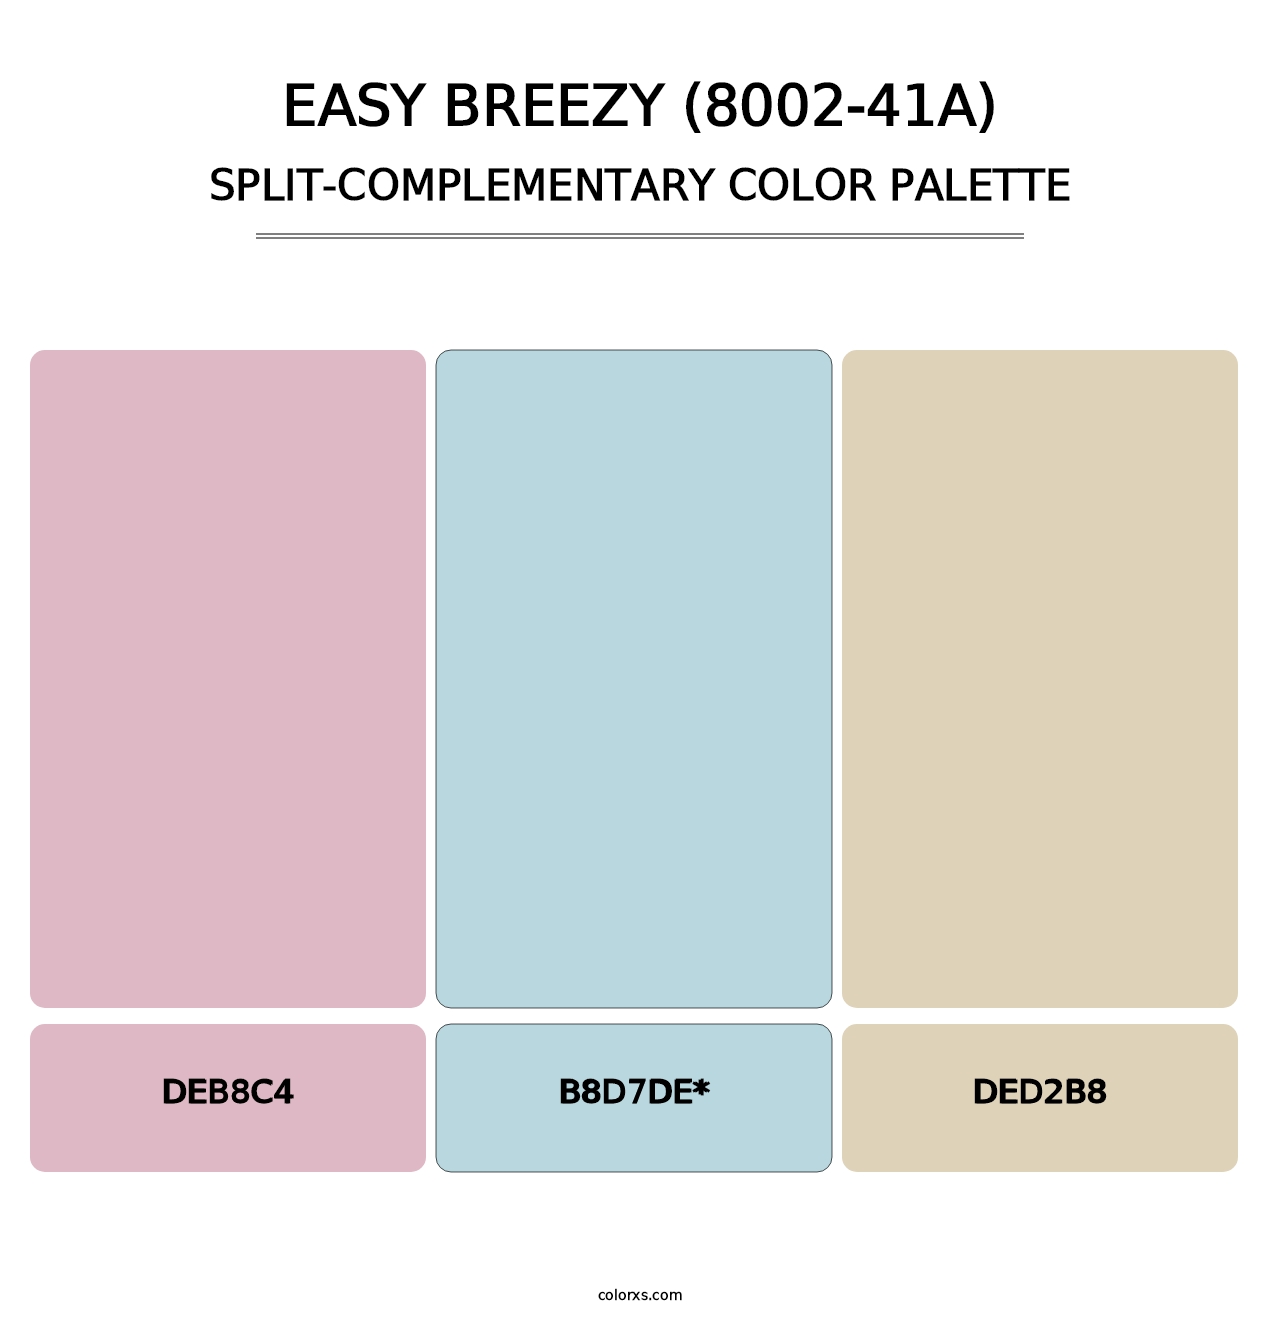 Easy Breezy (8002-41A) - Split-Complementary Color Palette